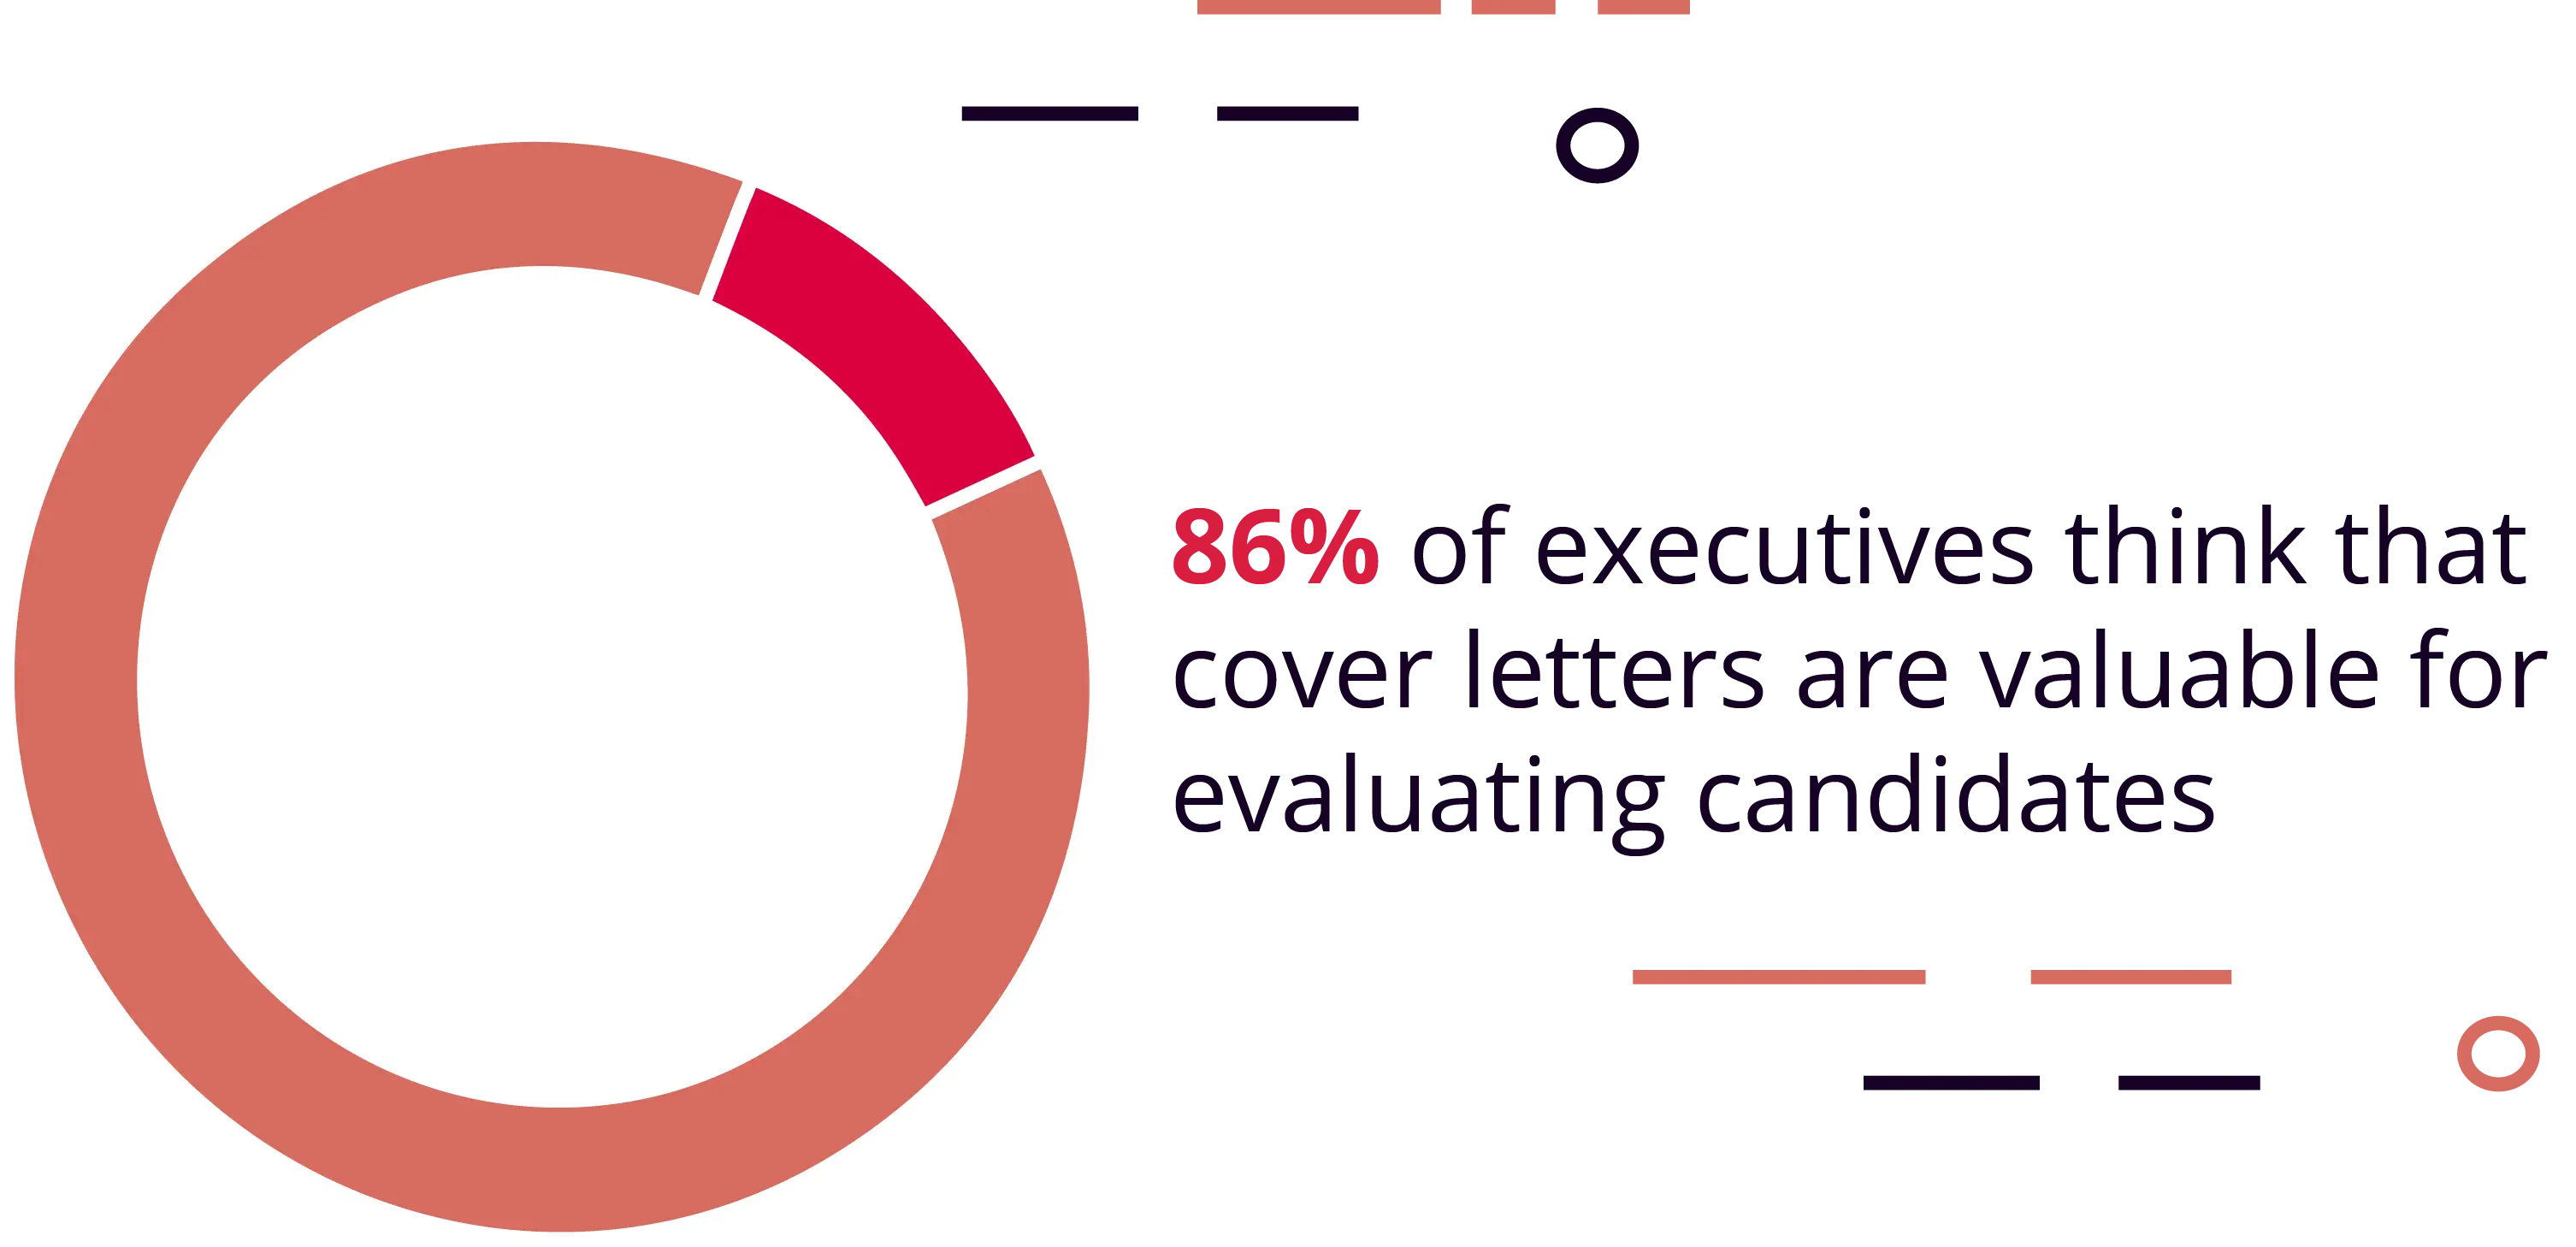 86% of Executives Think That Cover Letters Are Valuable for Evaluating Candidates